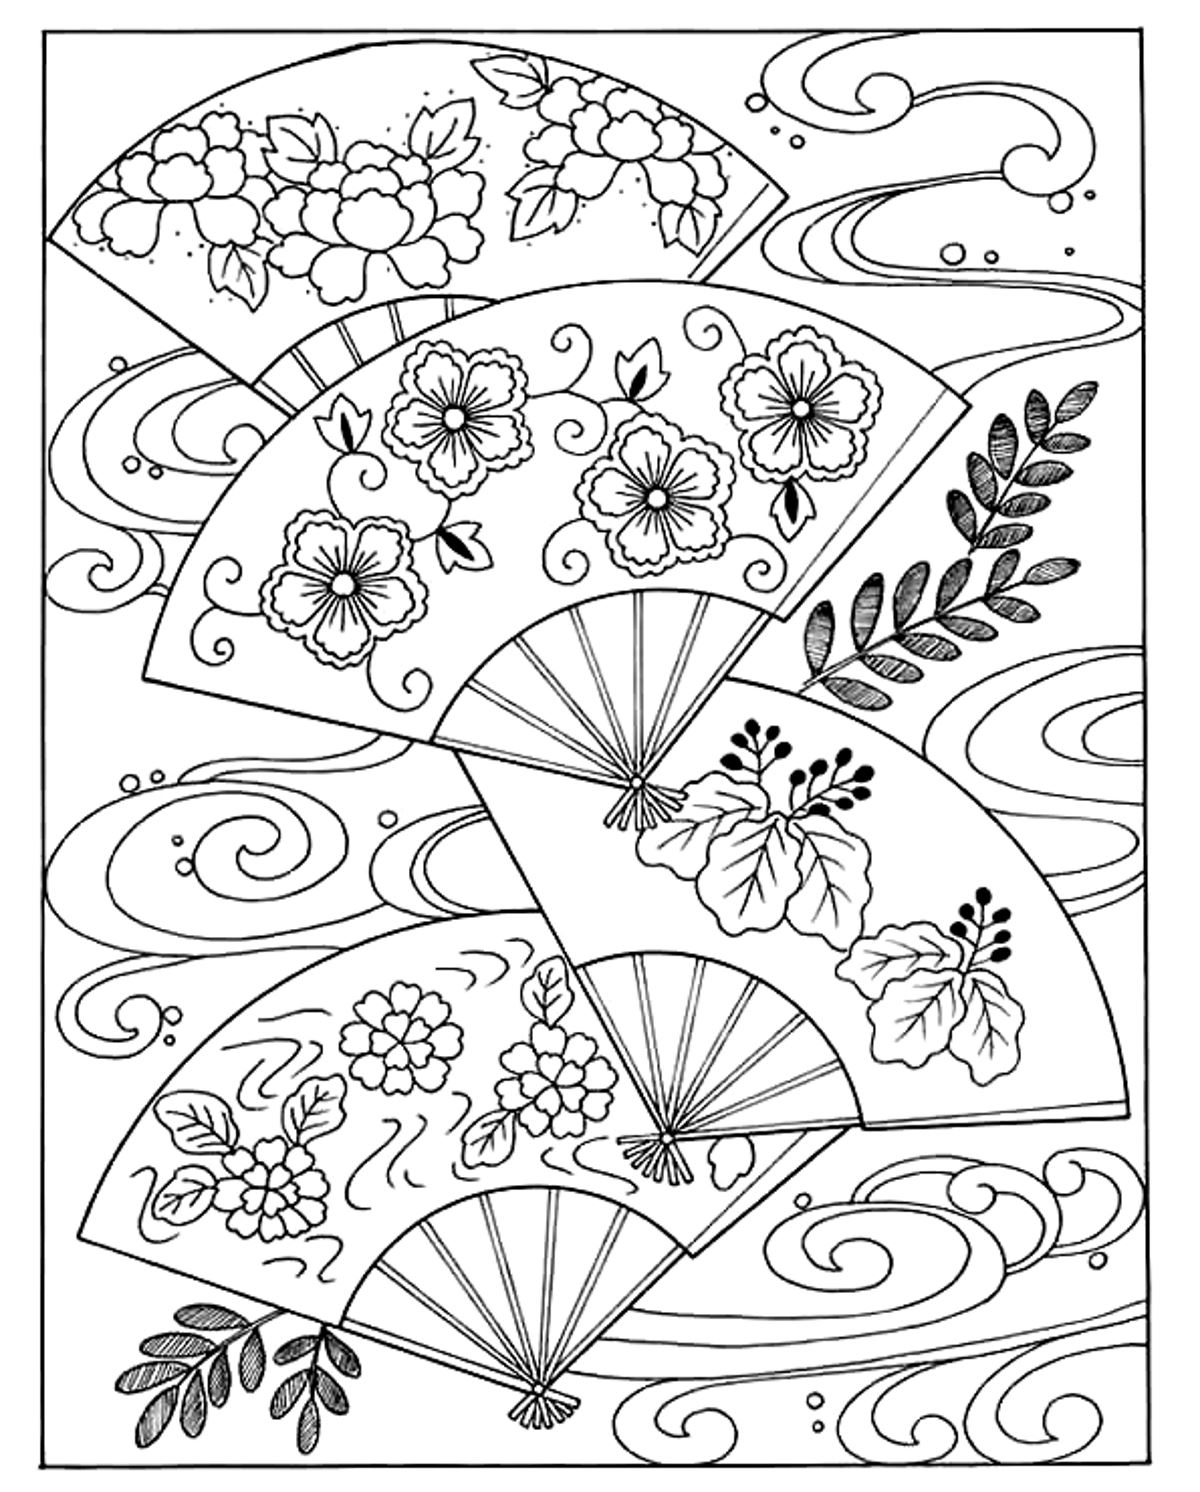 Japan - Coloring Pages for adults : coloring-japanese-hand-fan ...